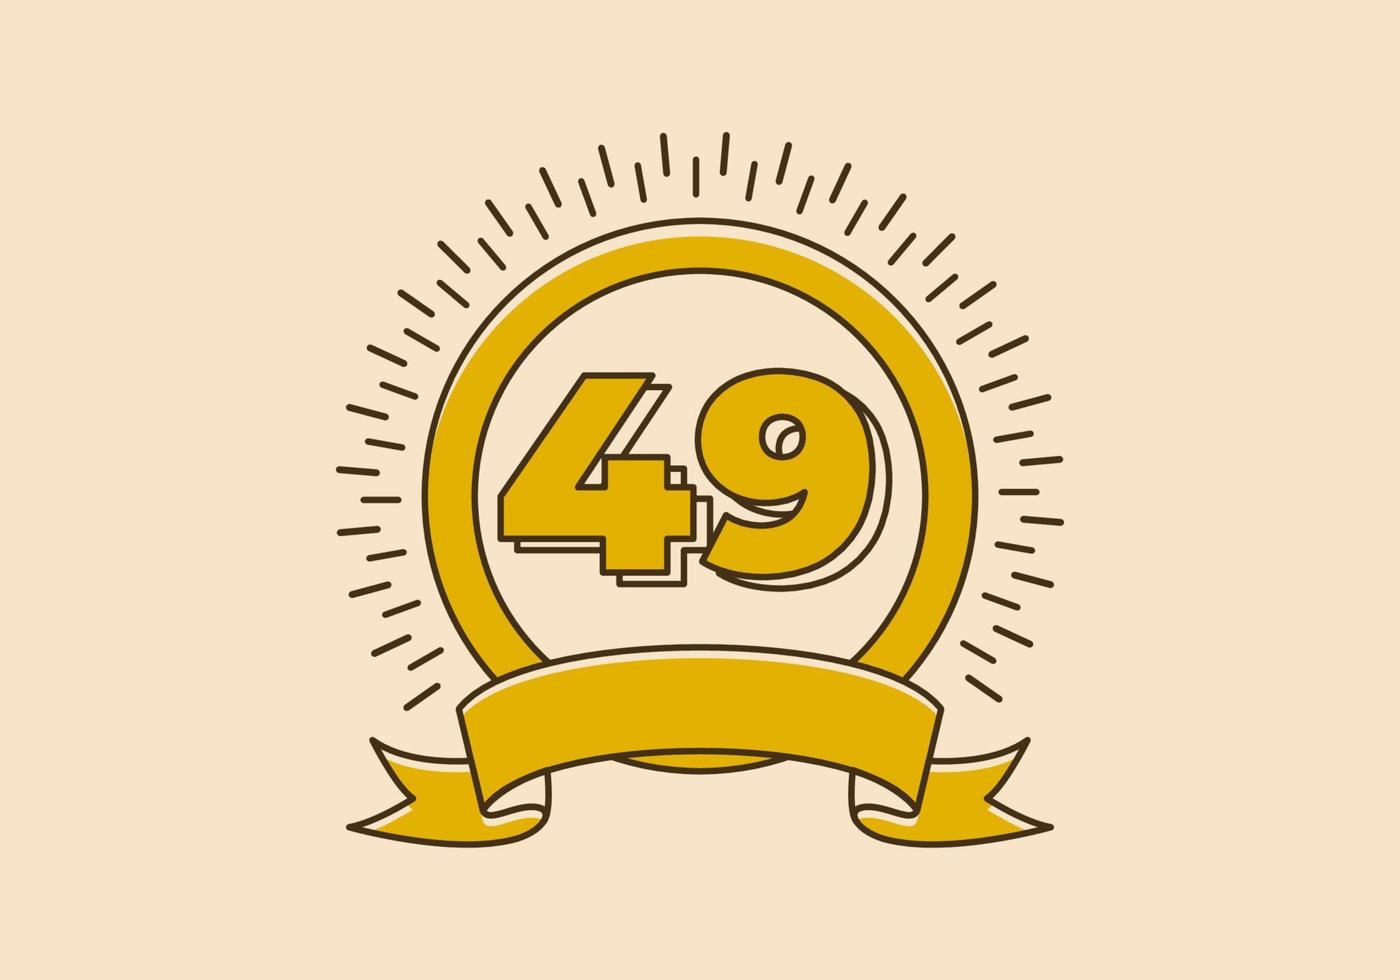 Vintage yellow circle badge with number 49 on it vector